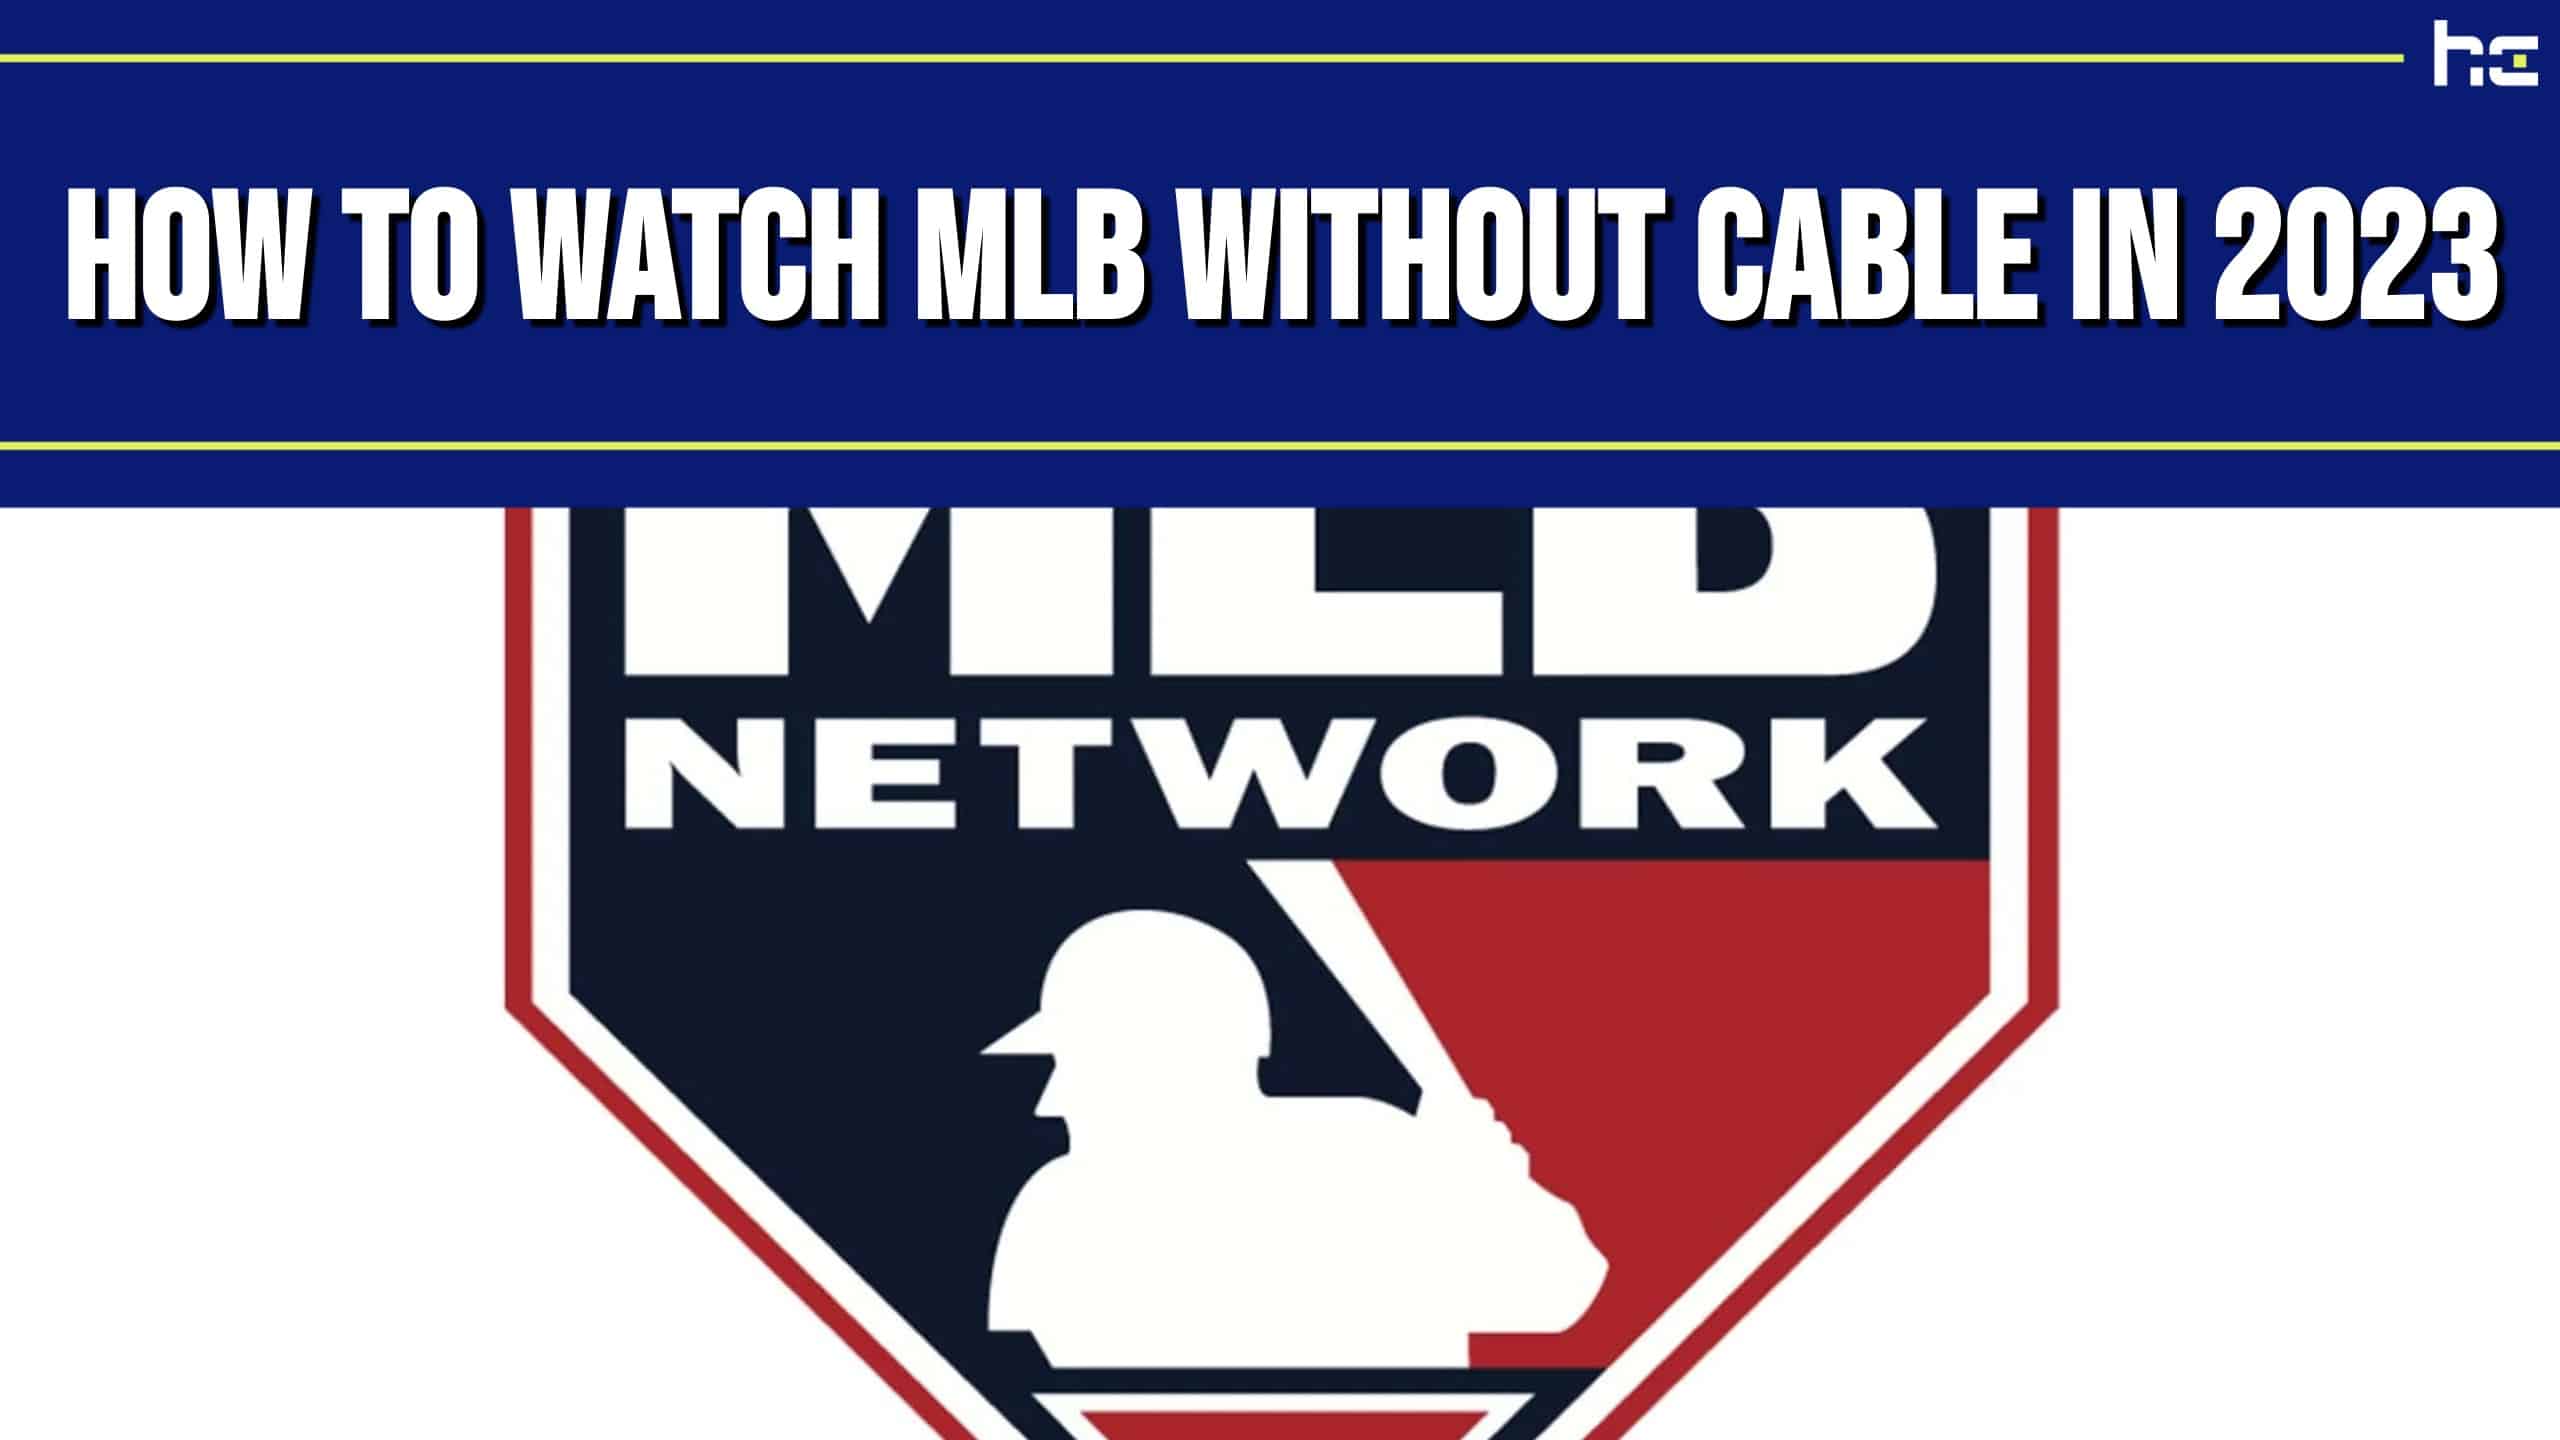 Watch MLB Without Cable in 2023